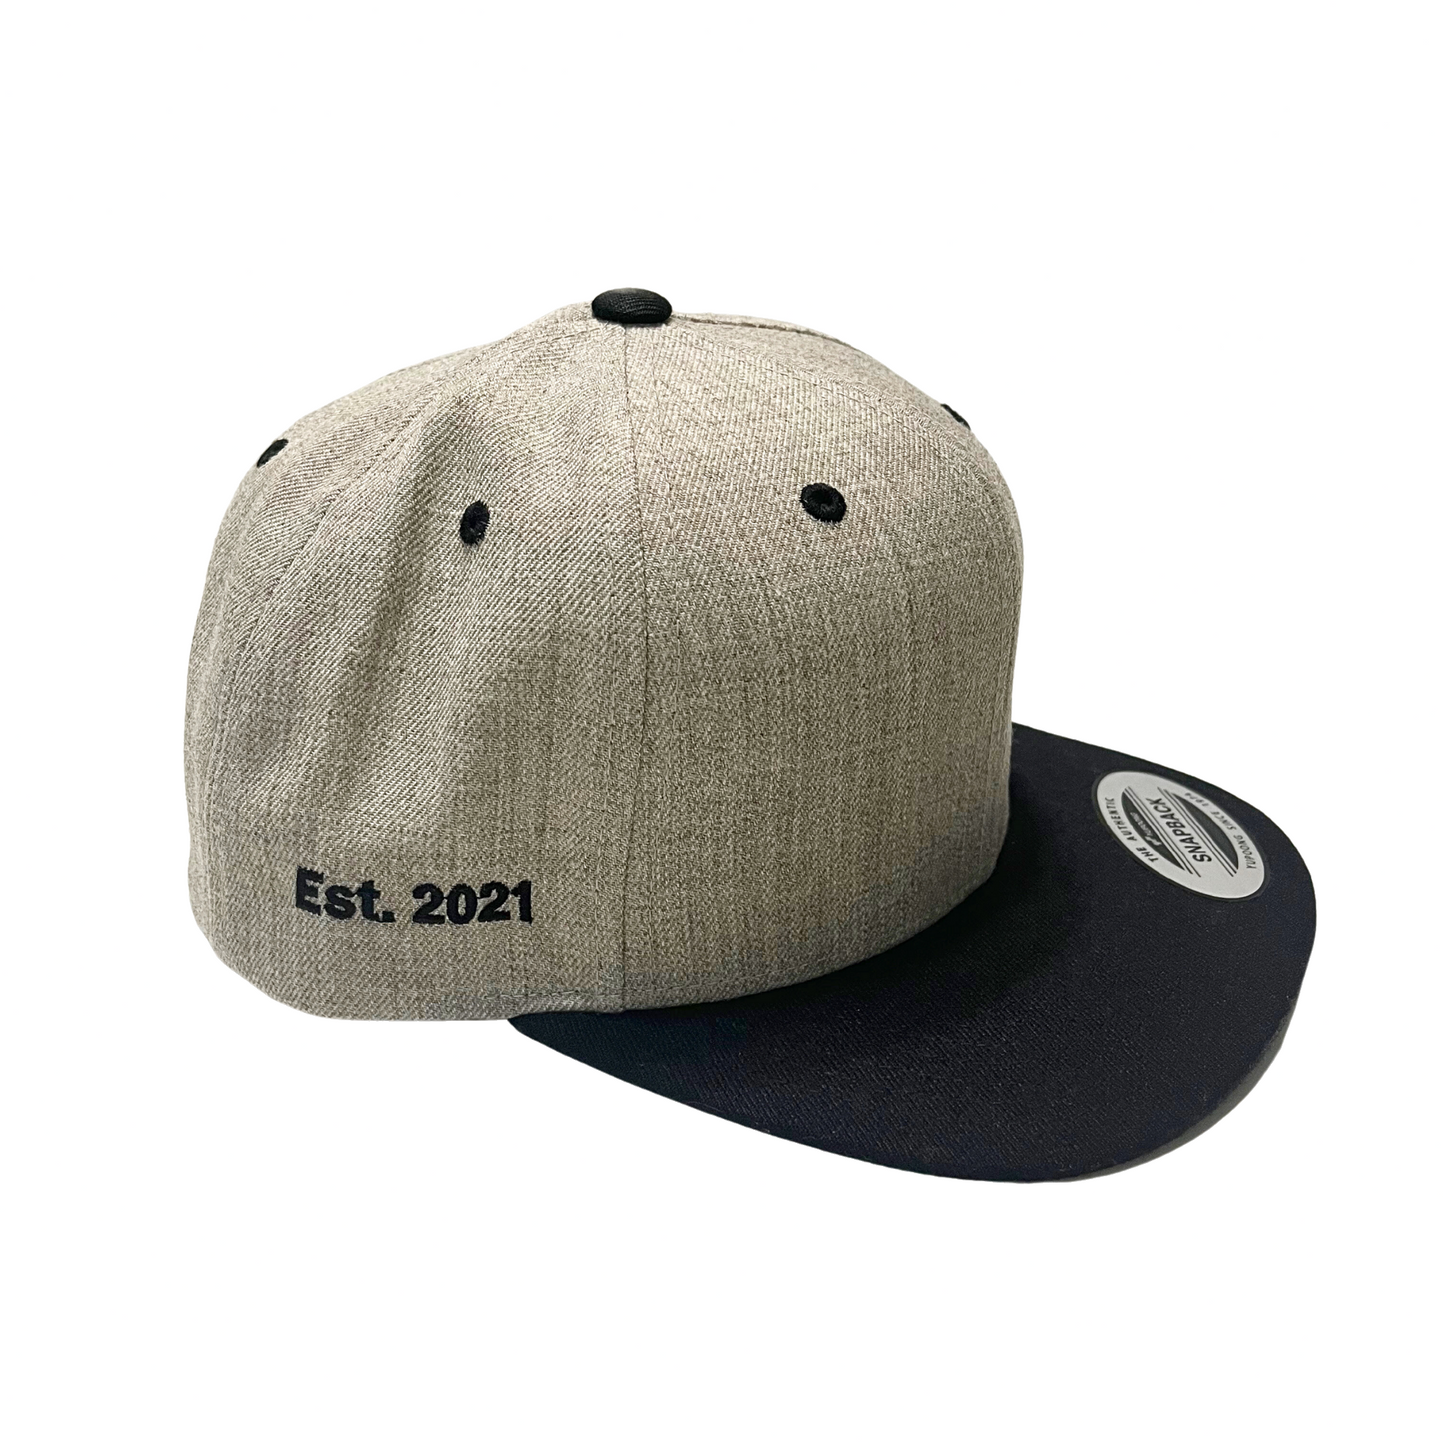 Ethereum Towers "1 Year Anniversary" Yupoong® Embroidered  Snapback Hat and Exclusive Anniversary Box